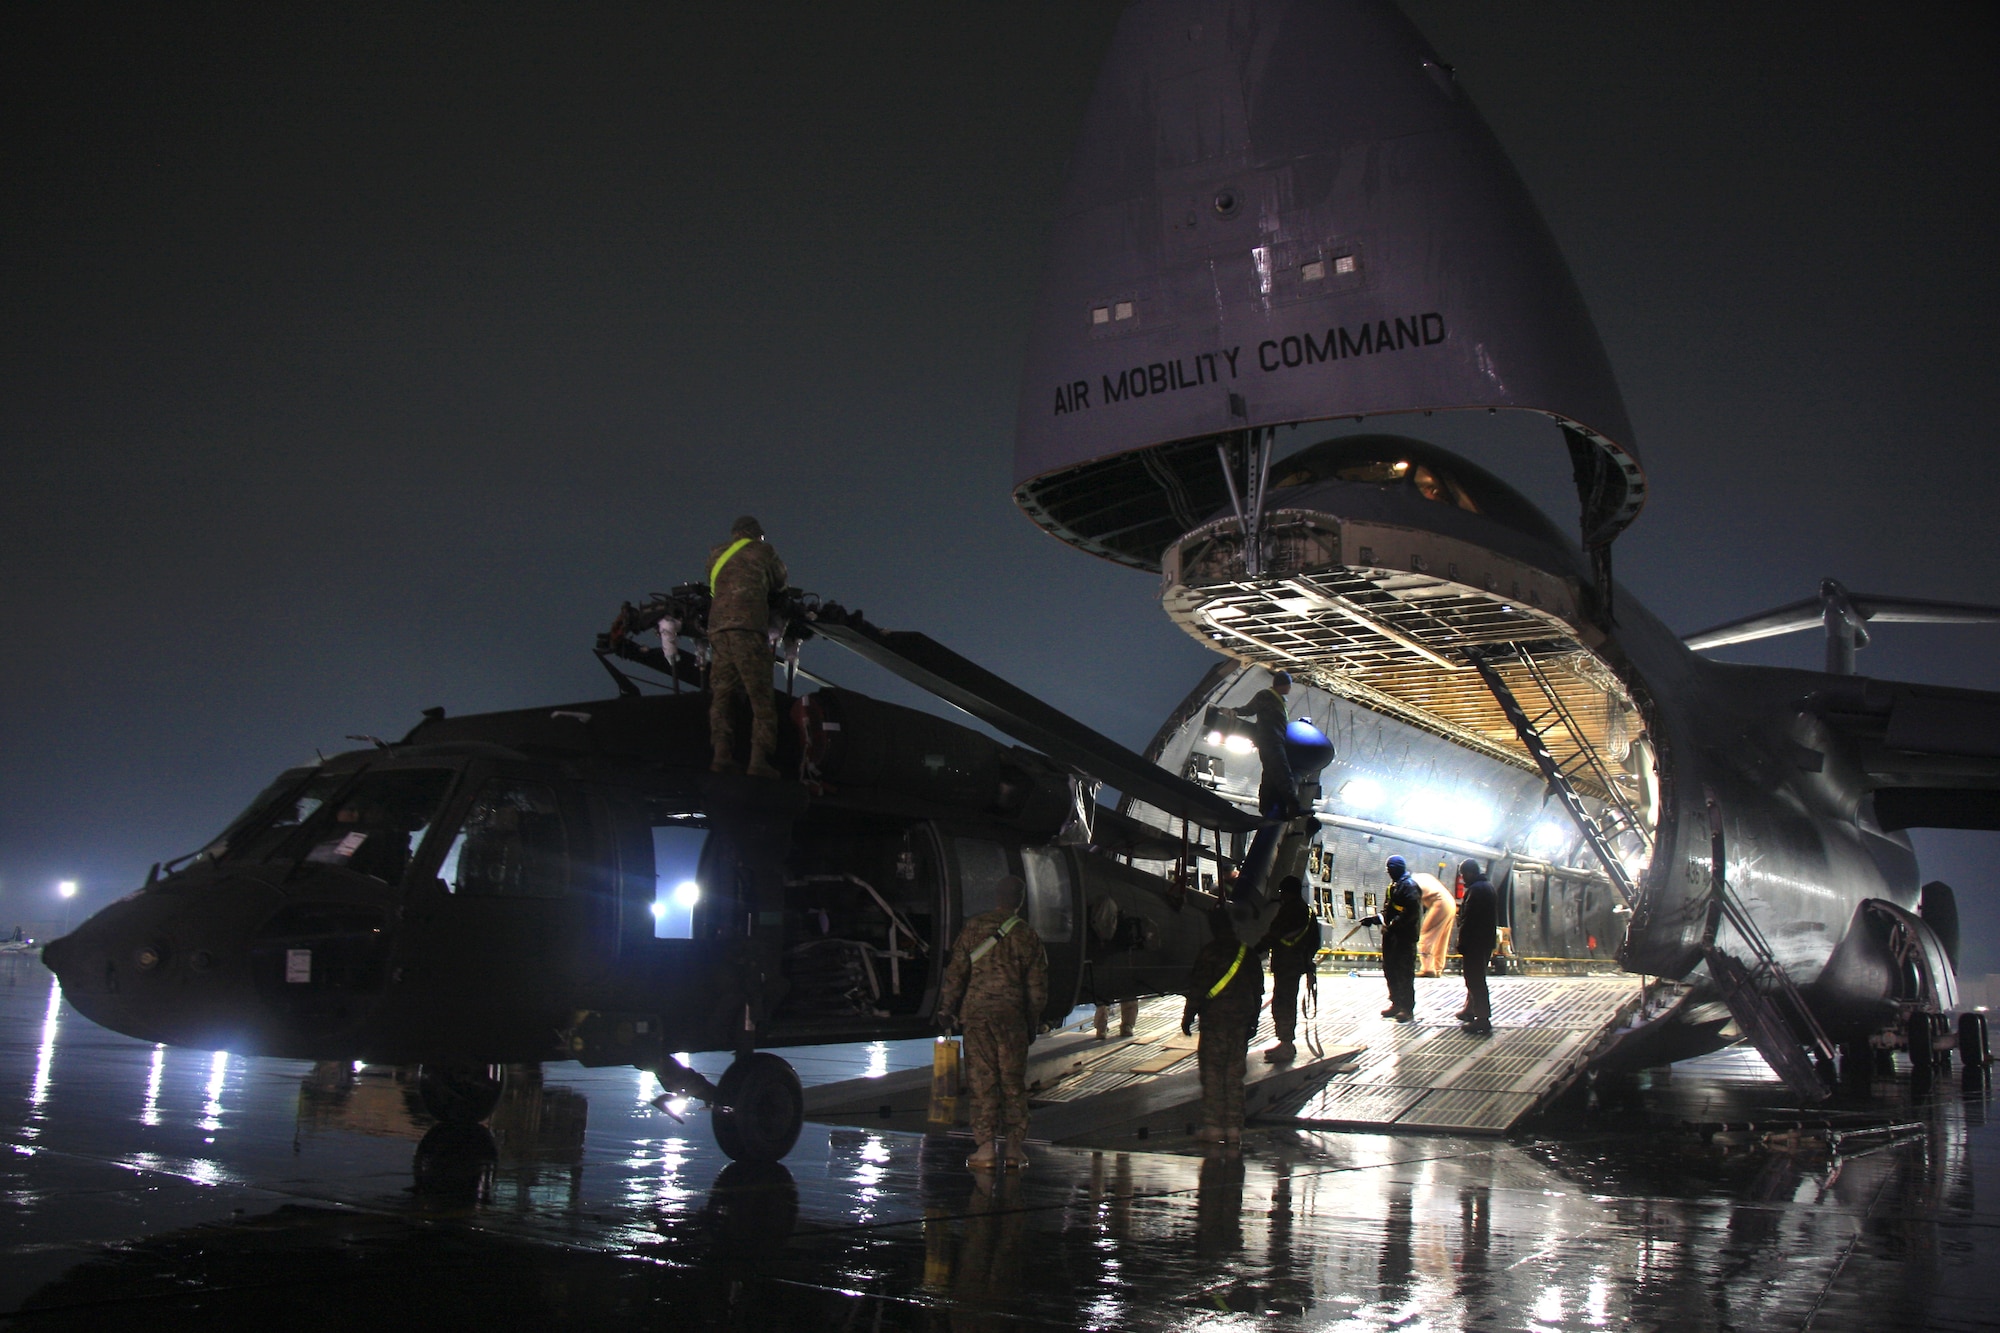 Soldiers and Airmen offload a UH-64 Black Hawk helicopter from a C-5M Super Galaxy at Bagram Air Field. The C-5M Super Galaxy has served the U.S. Air Force since 1969, and continues to provide vital heavy air lift to troops worldwide. (U.S. Army photo/1st Lt. Henry Chan, 18th Combat Sustainment Support Battalion Public Affairs)